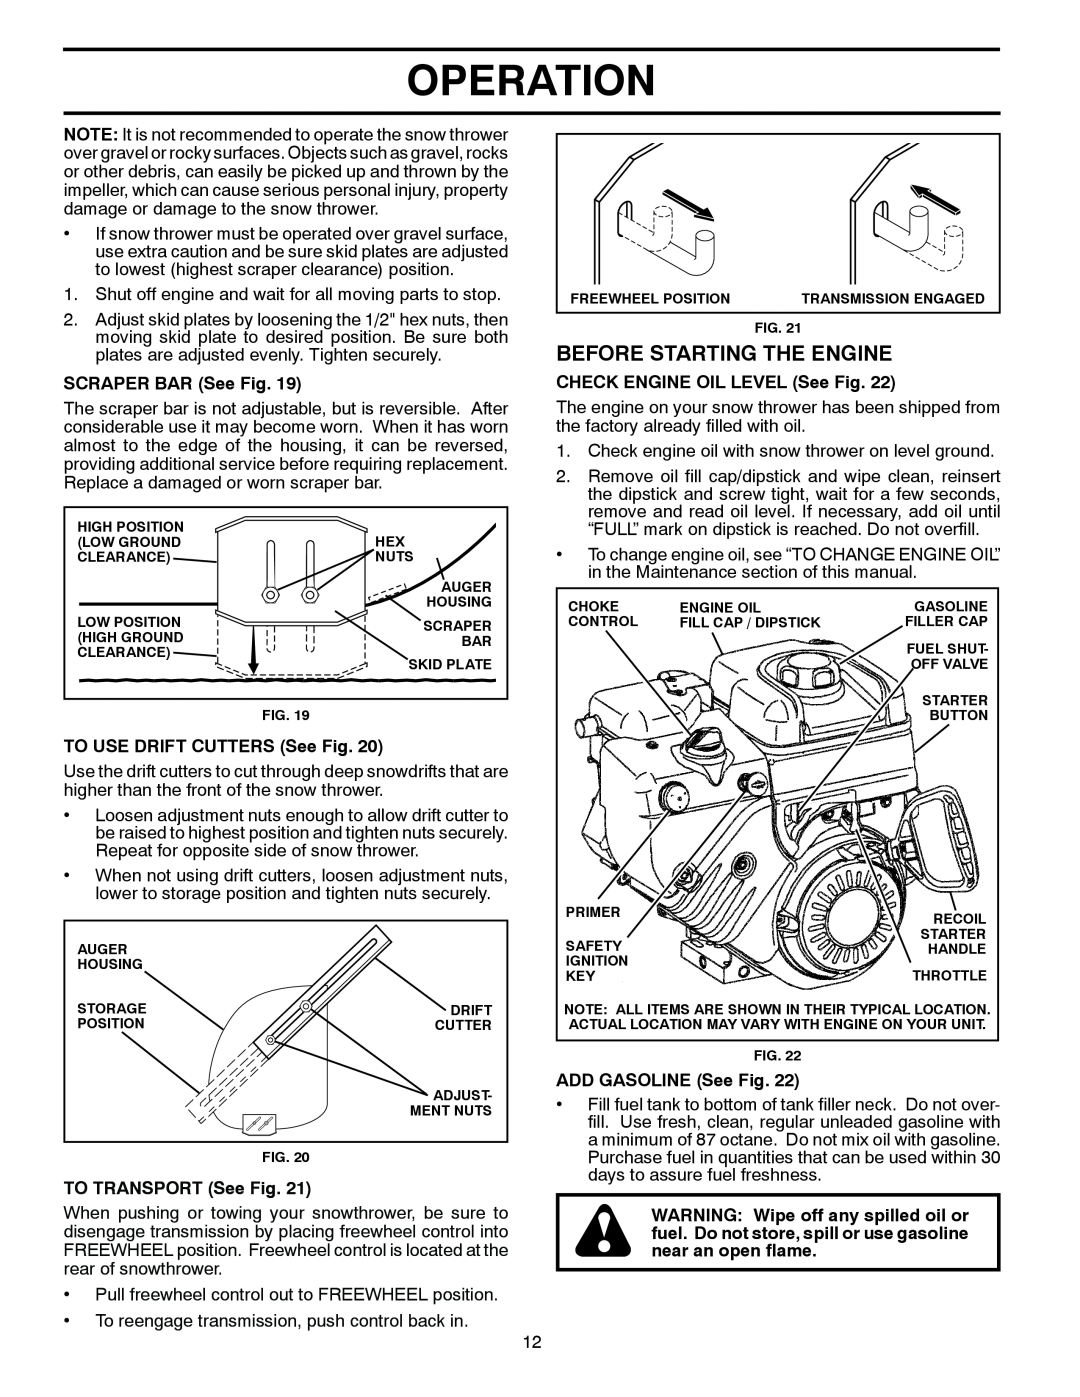 Husqvarna 16530 EXL, 96193006900 Before Starting The Engine, Operation, SCRAPER BAR See Fig, TO USE DRIFT CUTTERS See Fig 